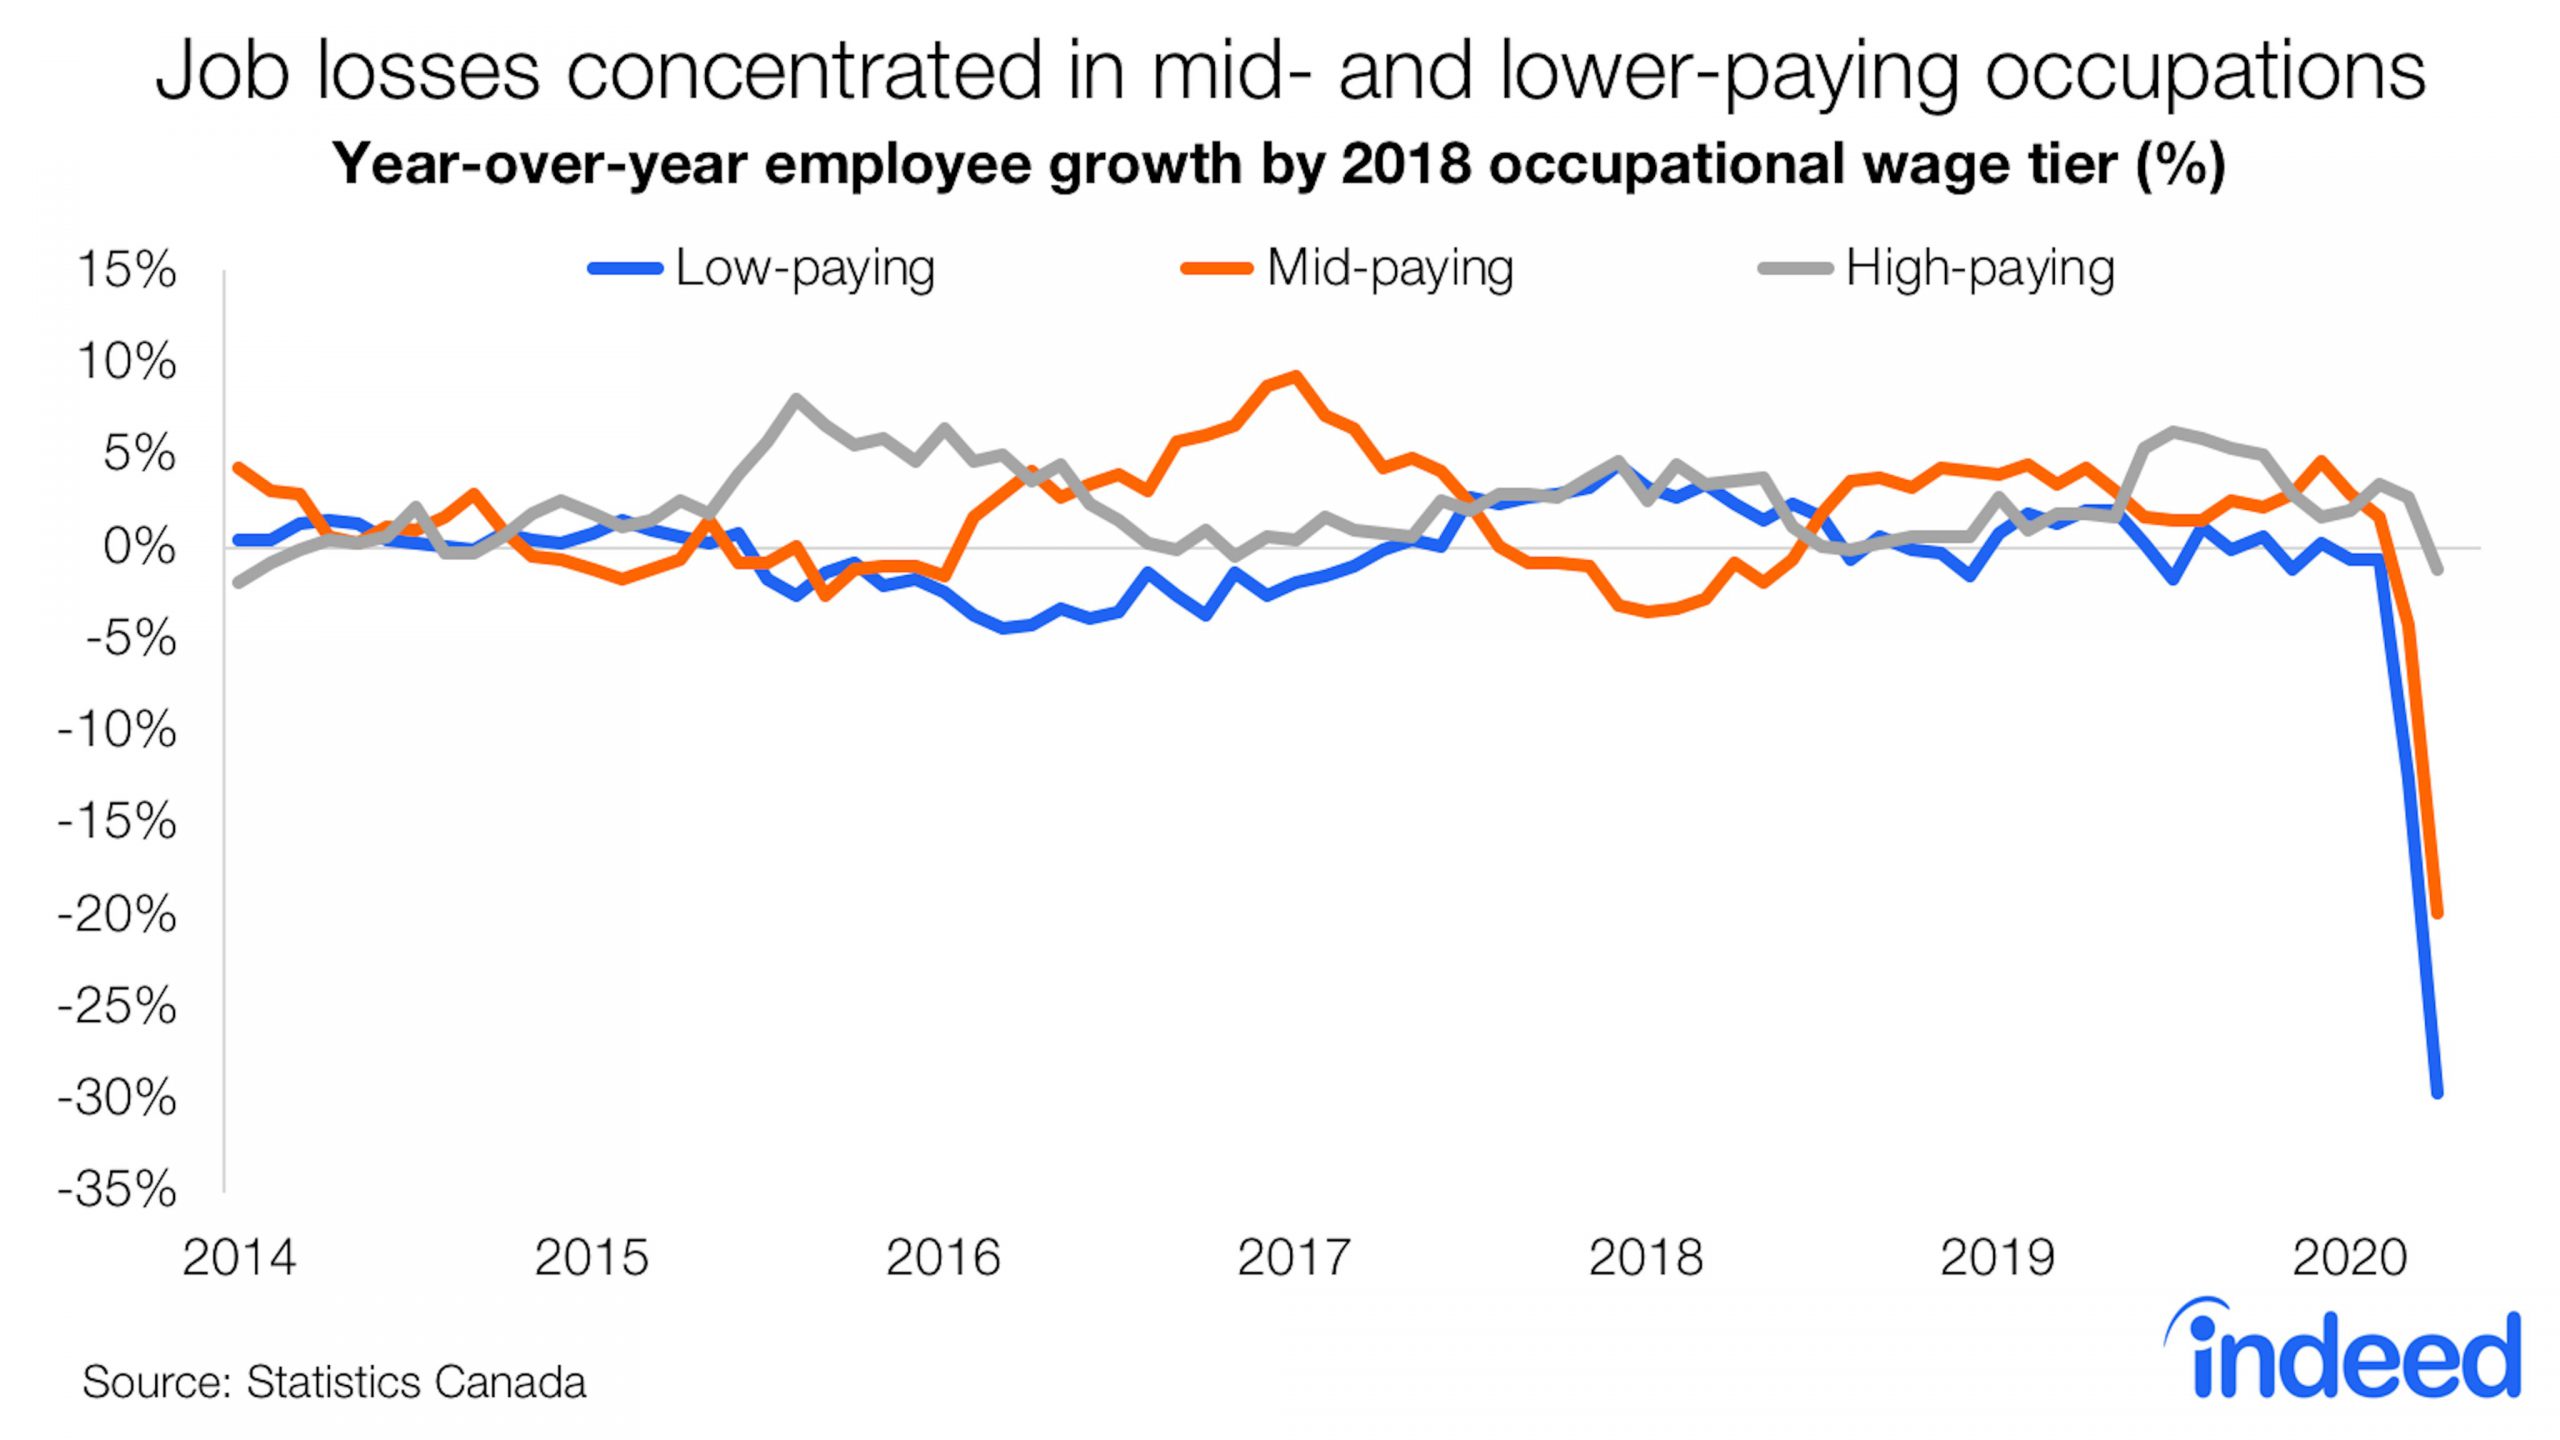 Job losses are concentrated in mid and lower paying occupations 